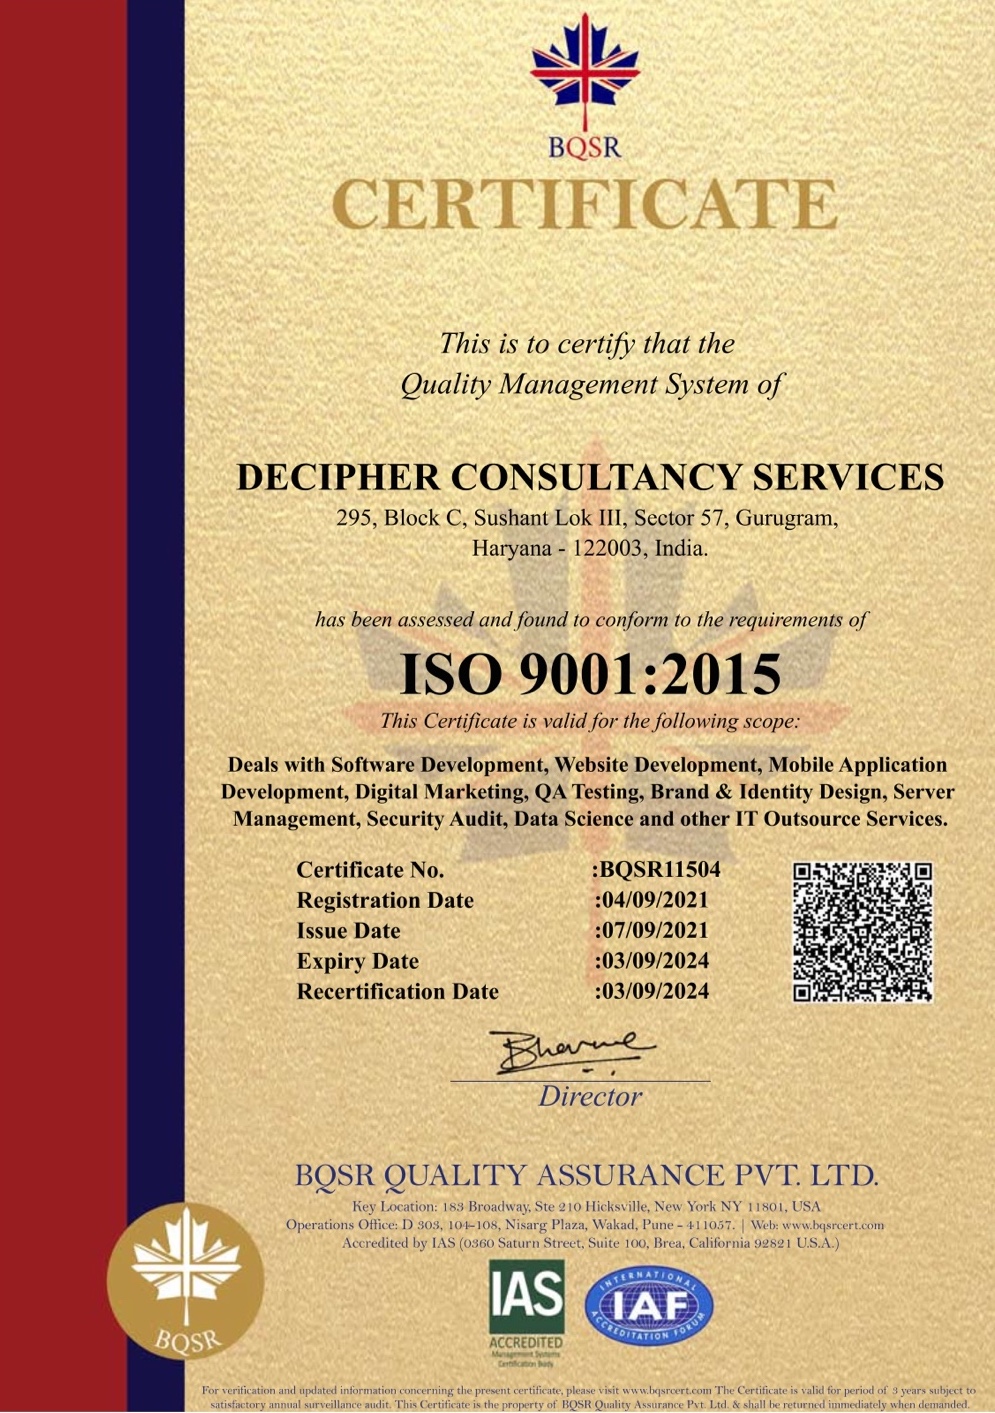 Decipher is Now ISO 9001:2015 Certified